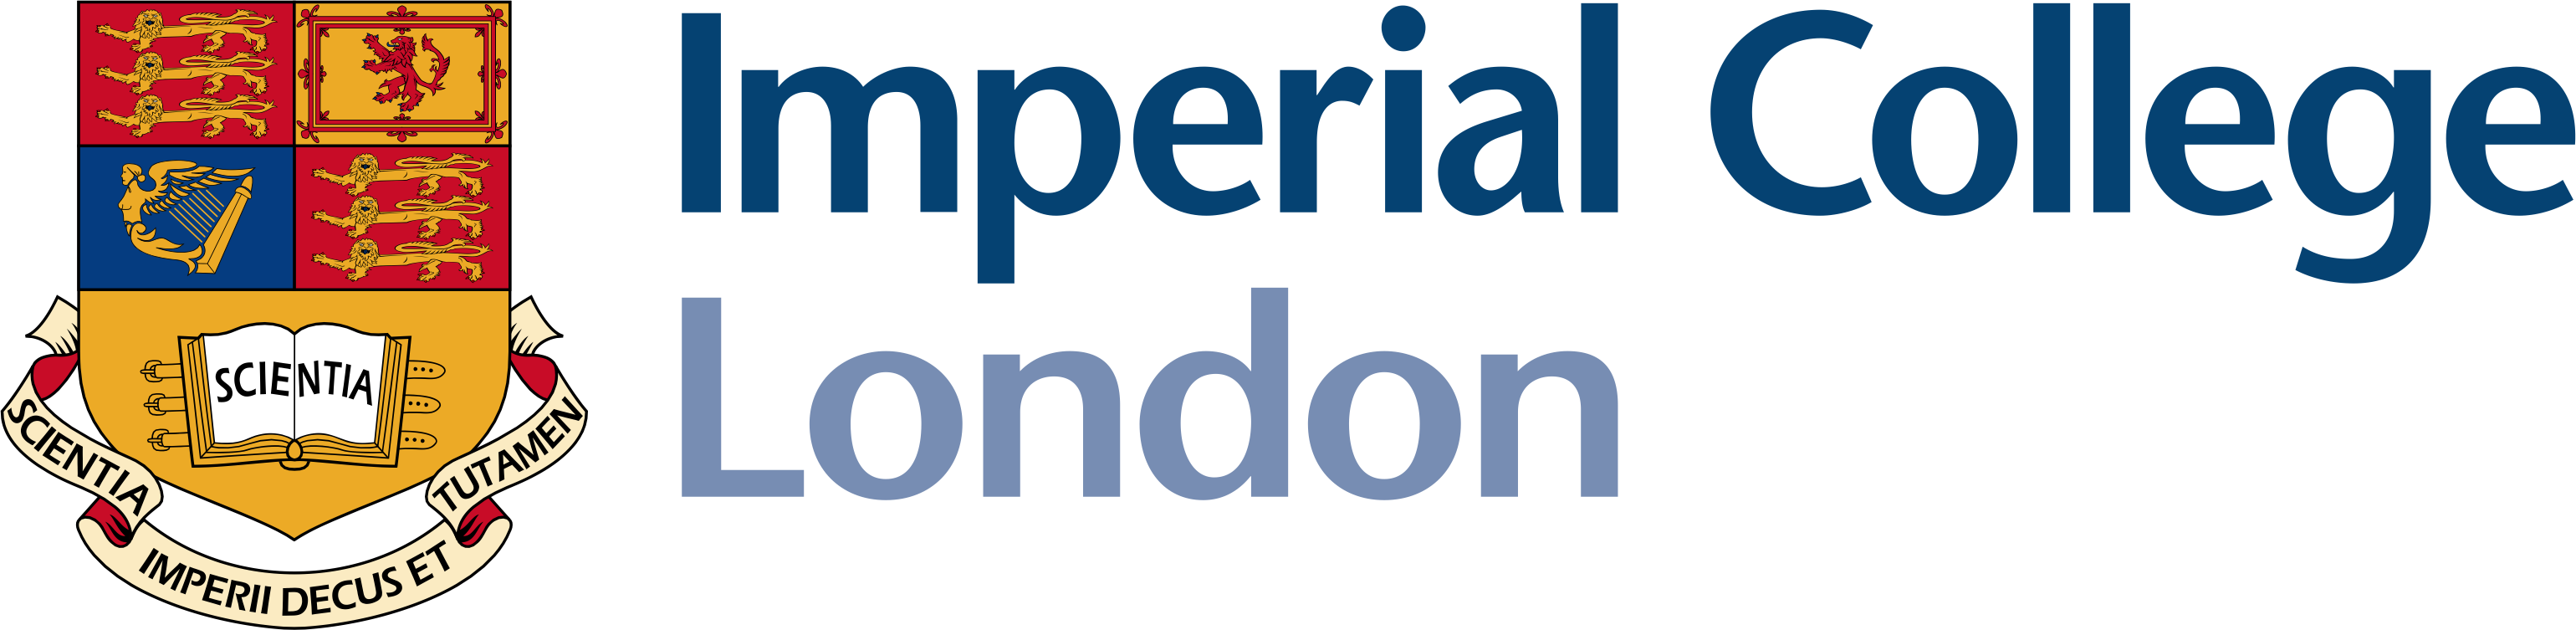 Imperial College London2